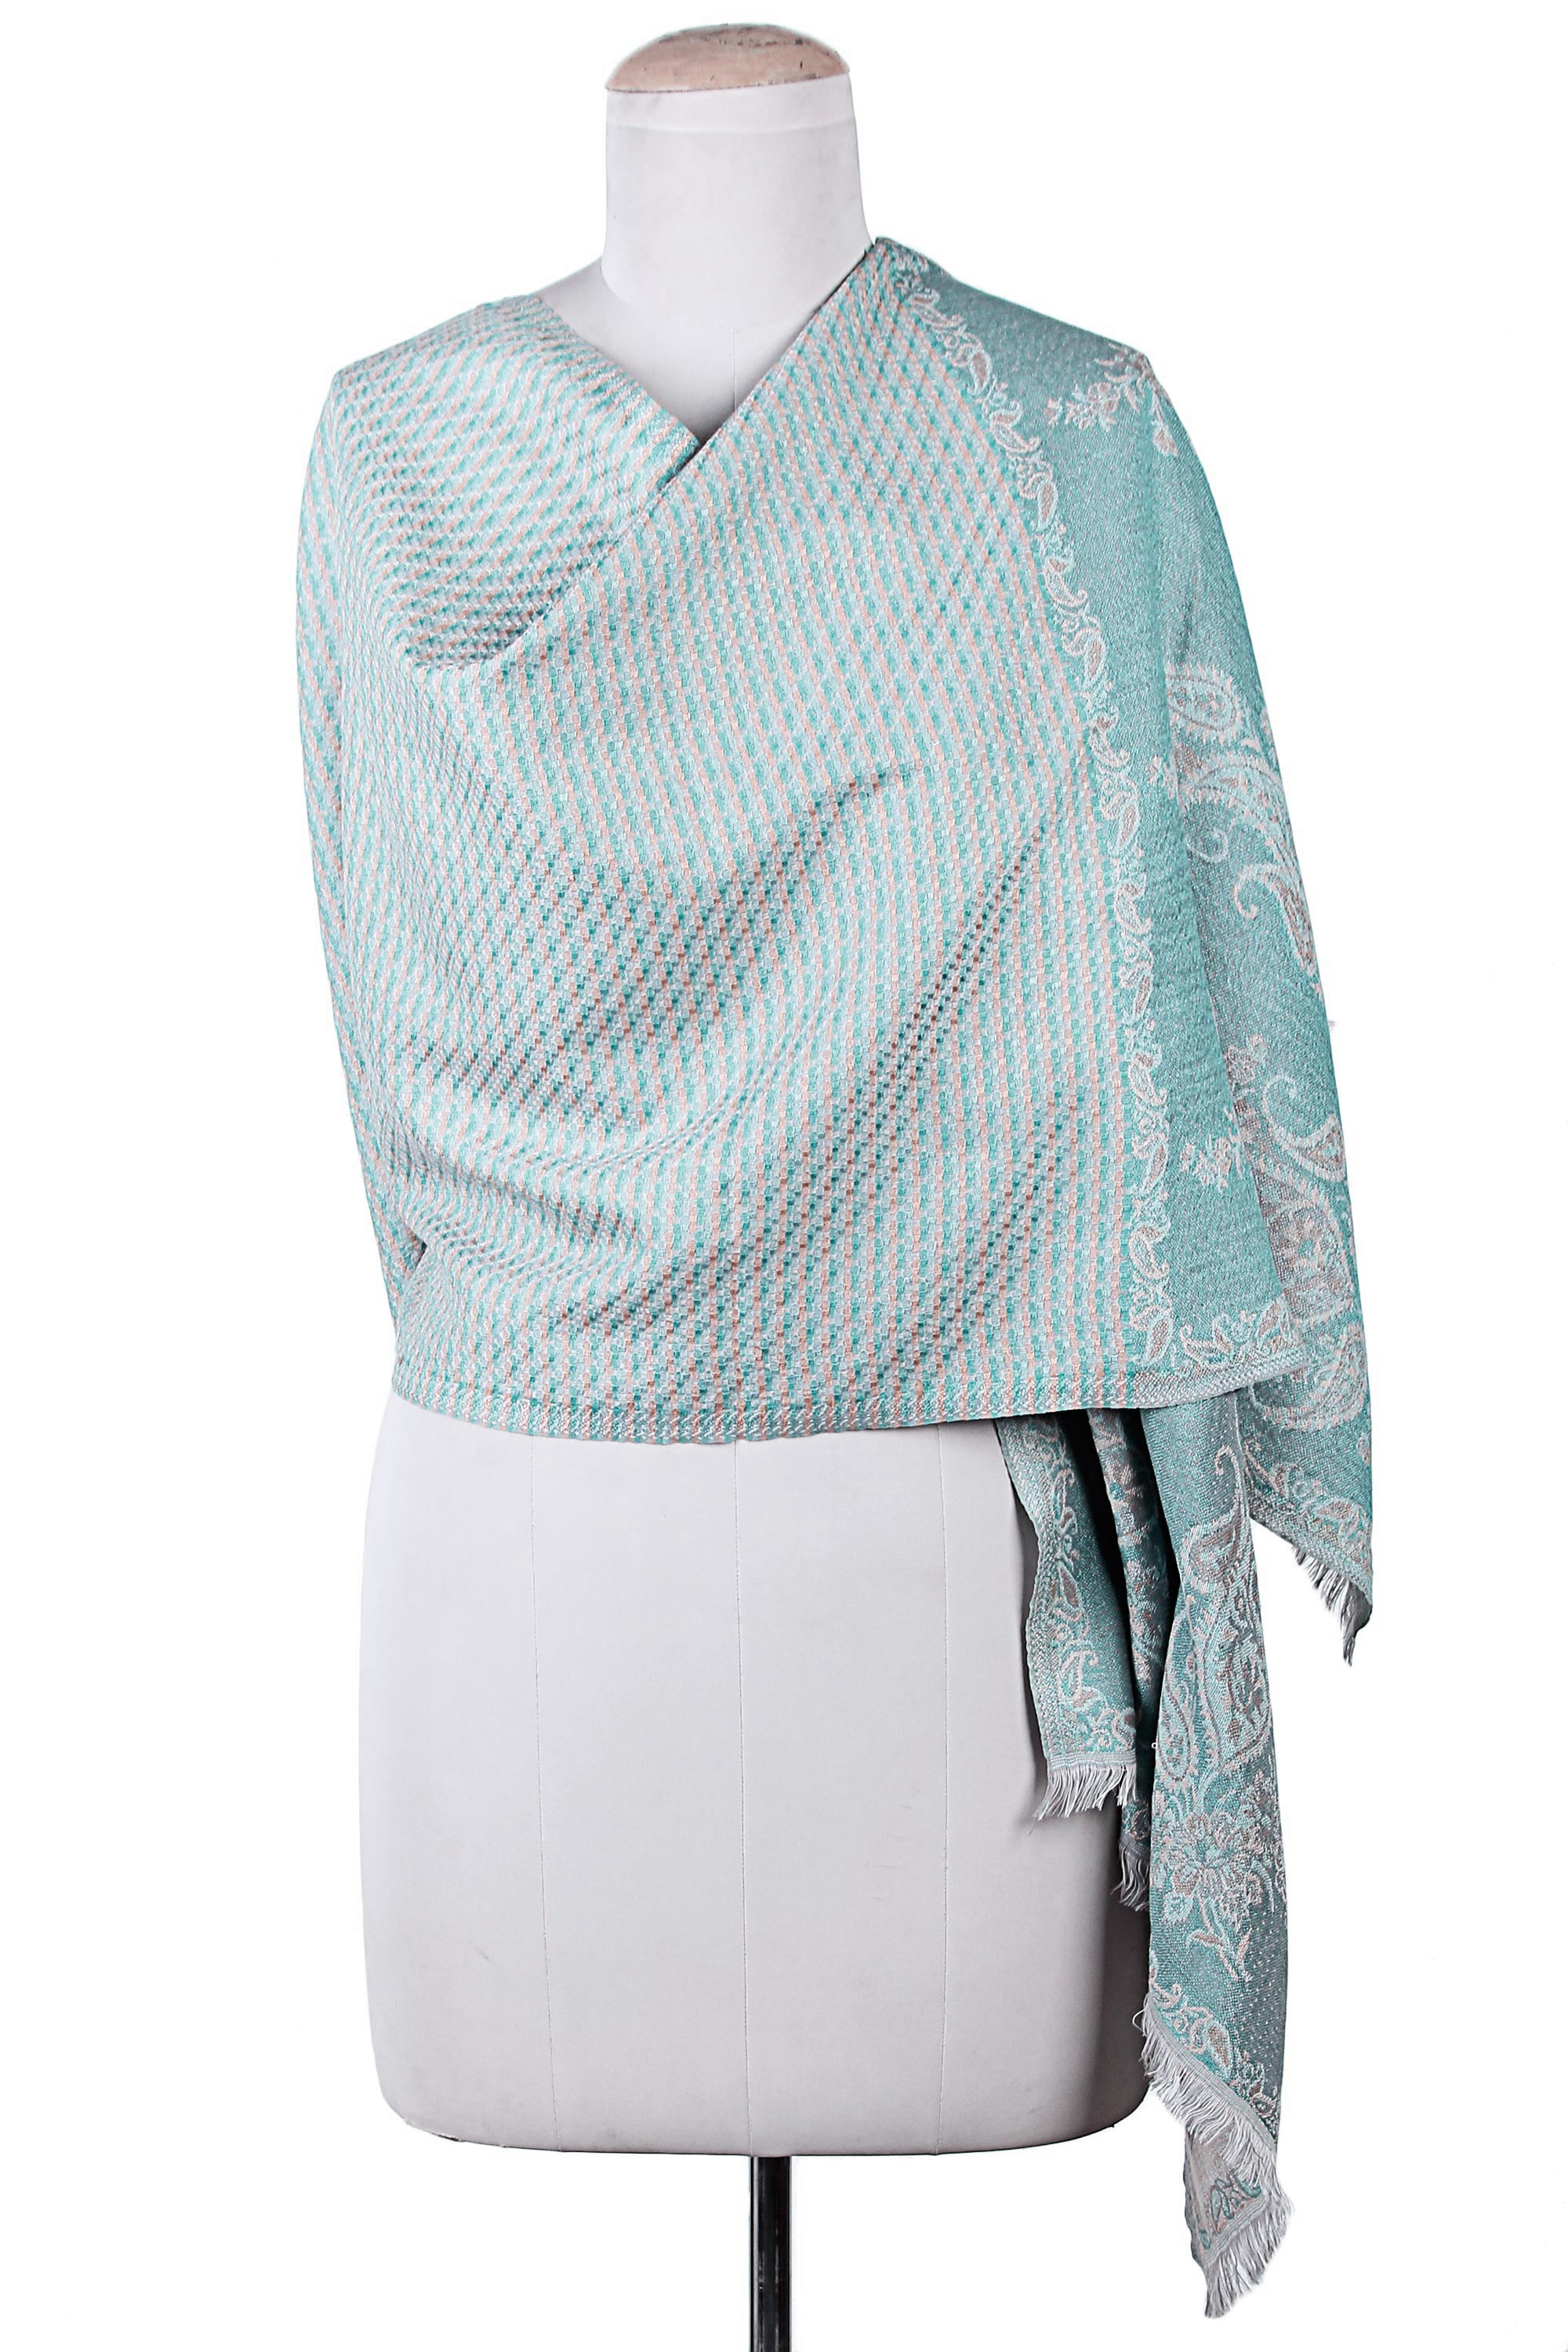 UNICEF Market | Wool and Silk Blend Jacquard Paisley Shawl from India ...